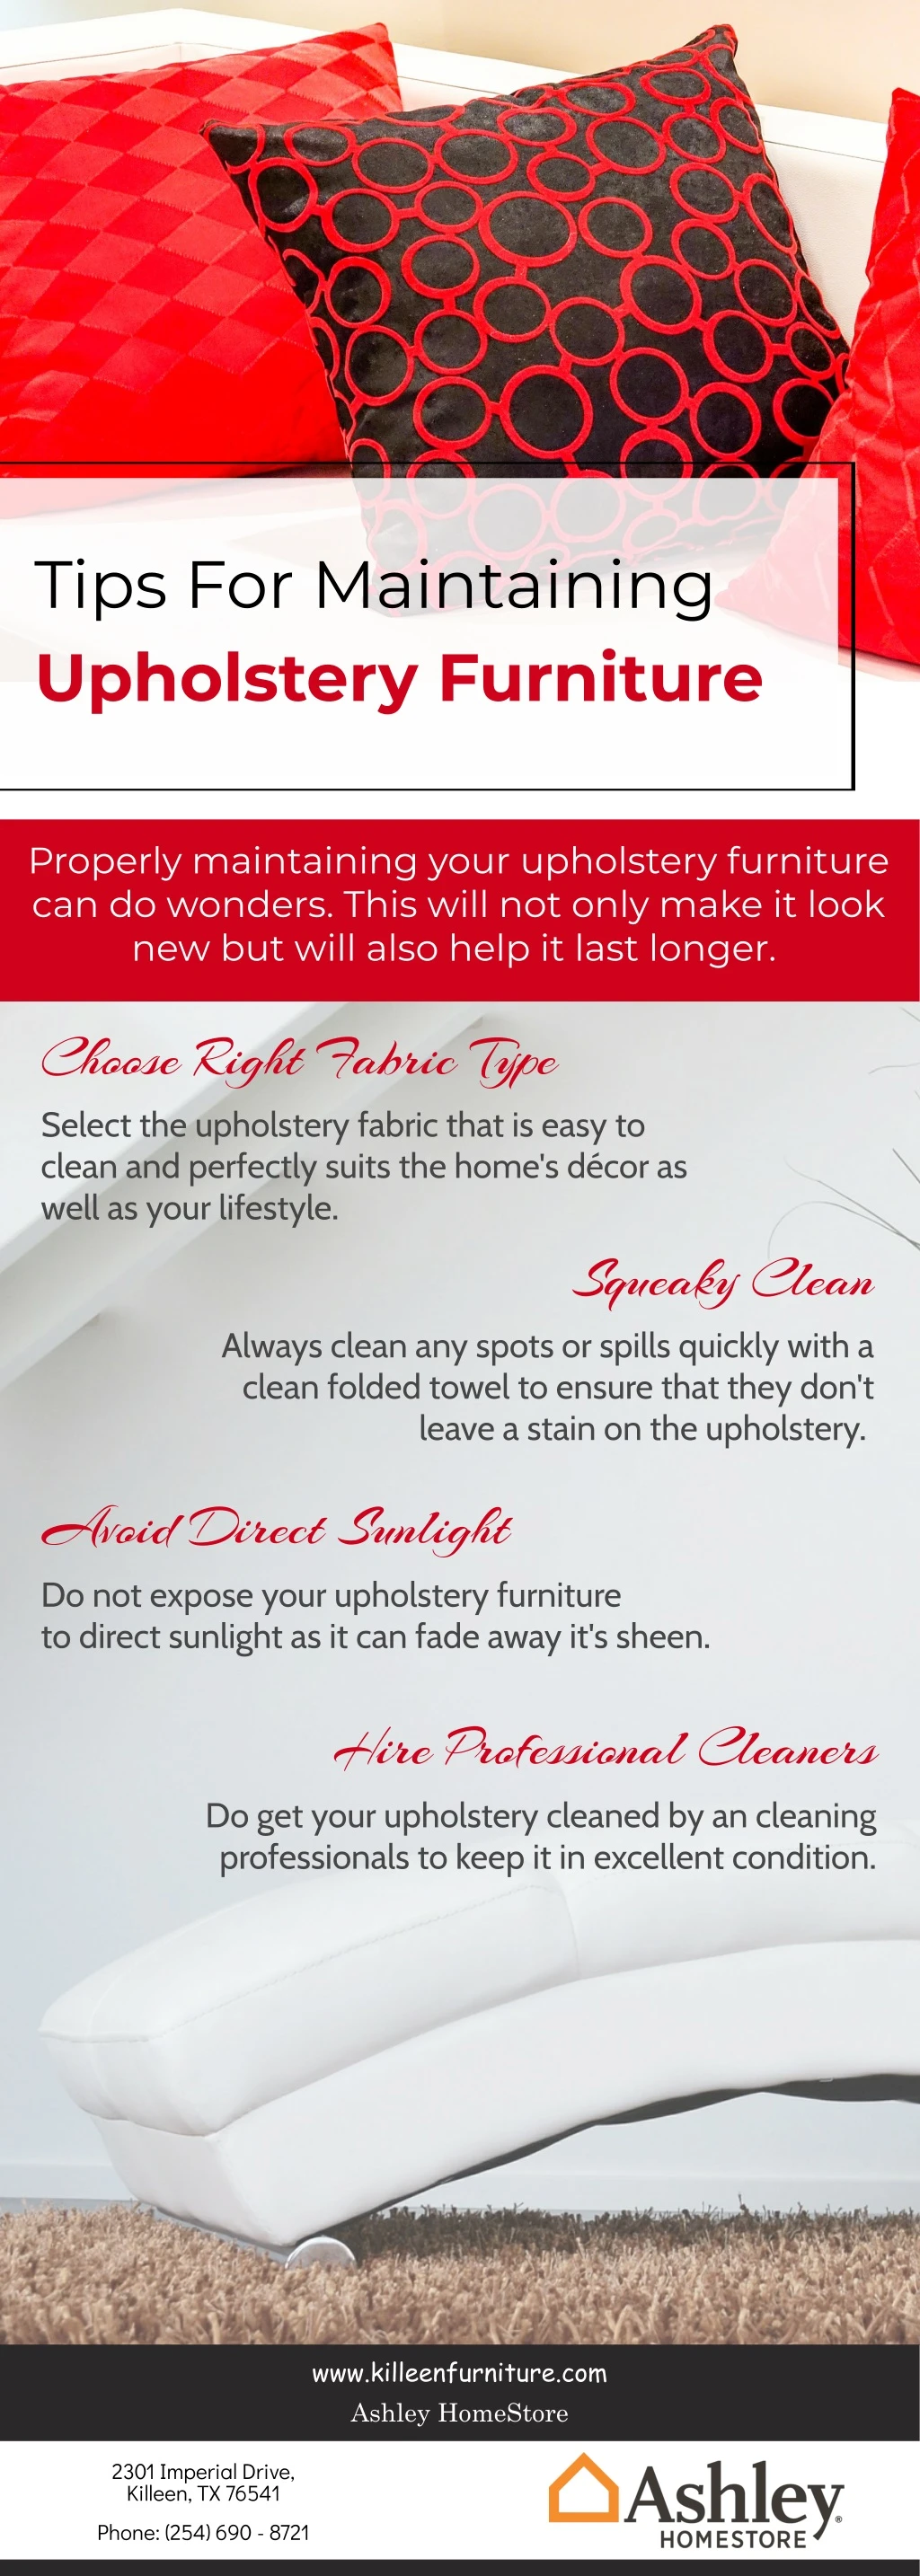 tips for maintaining upholstery furniture